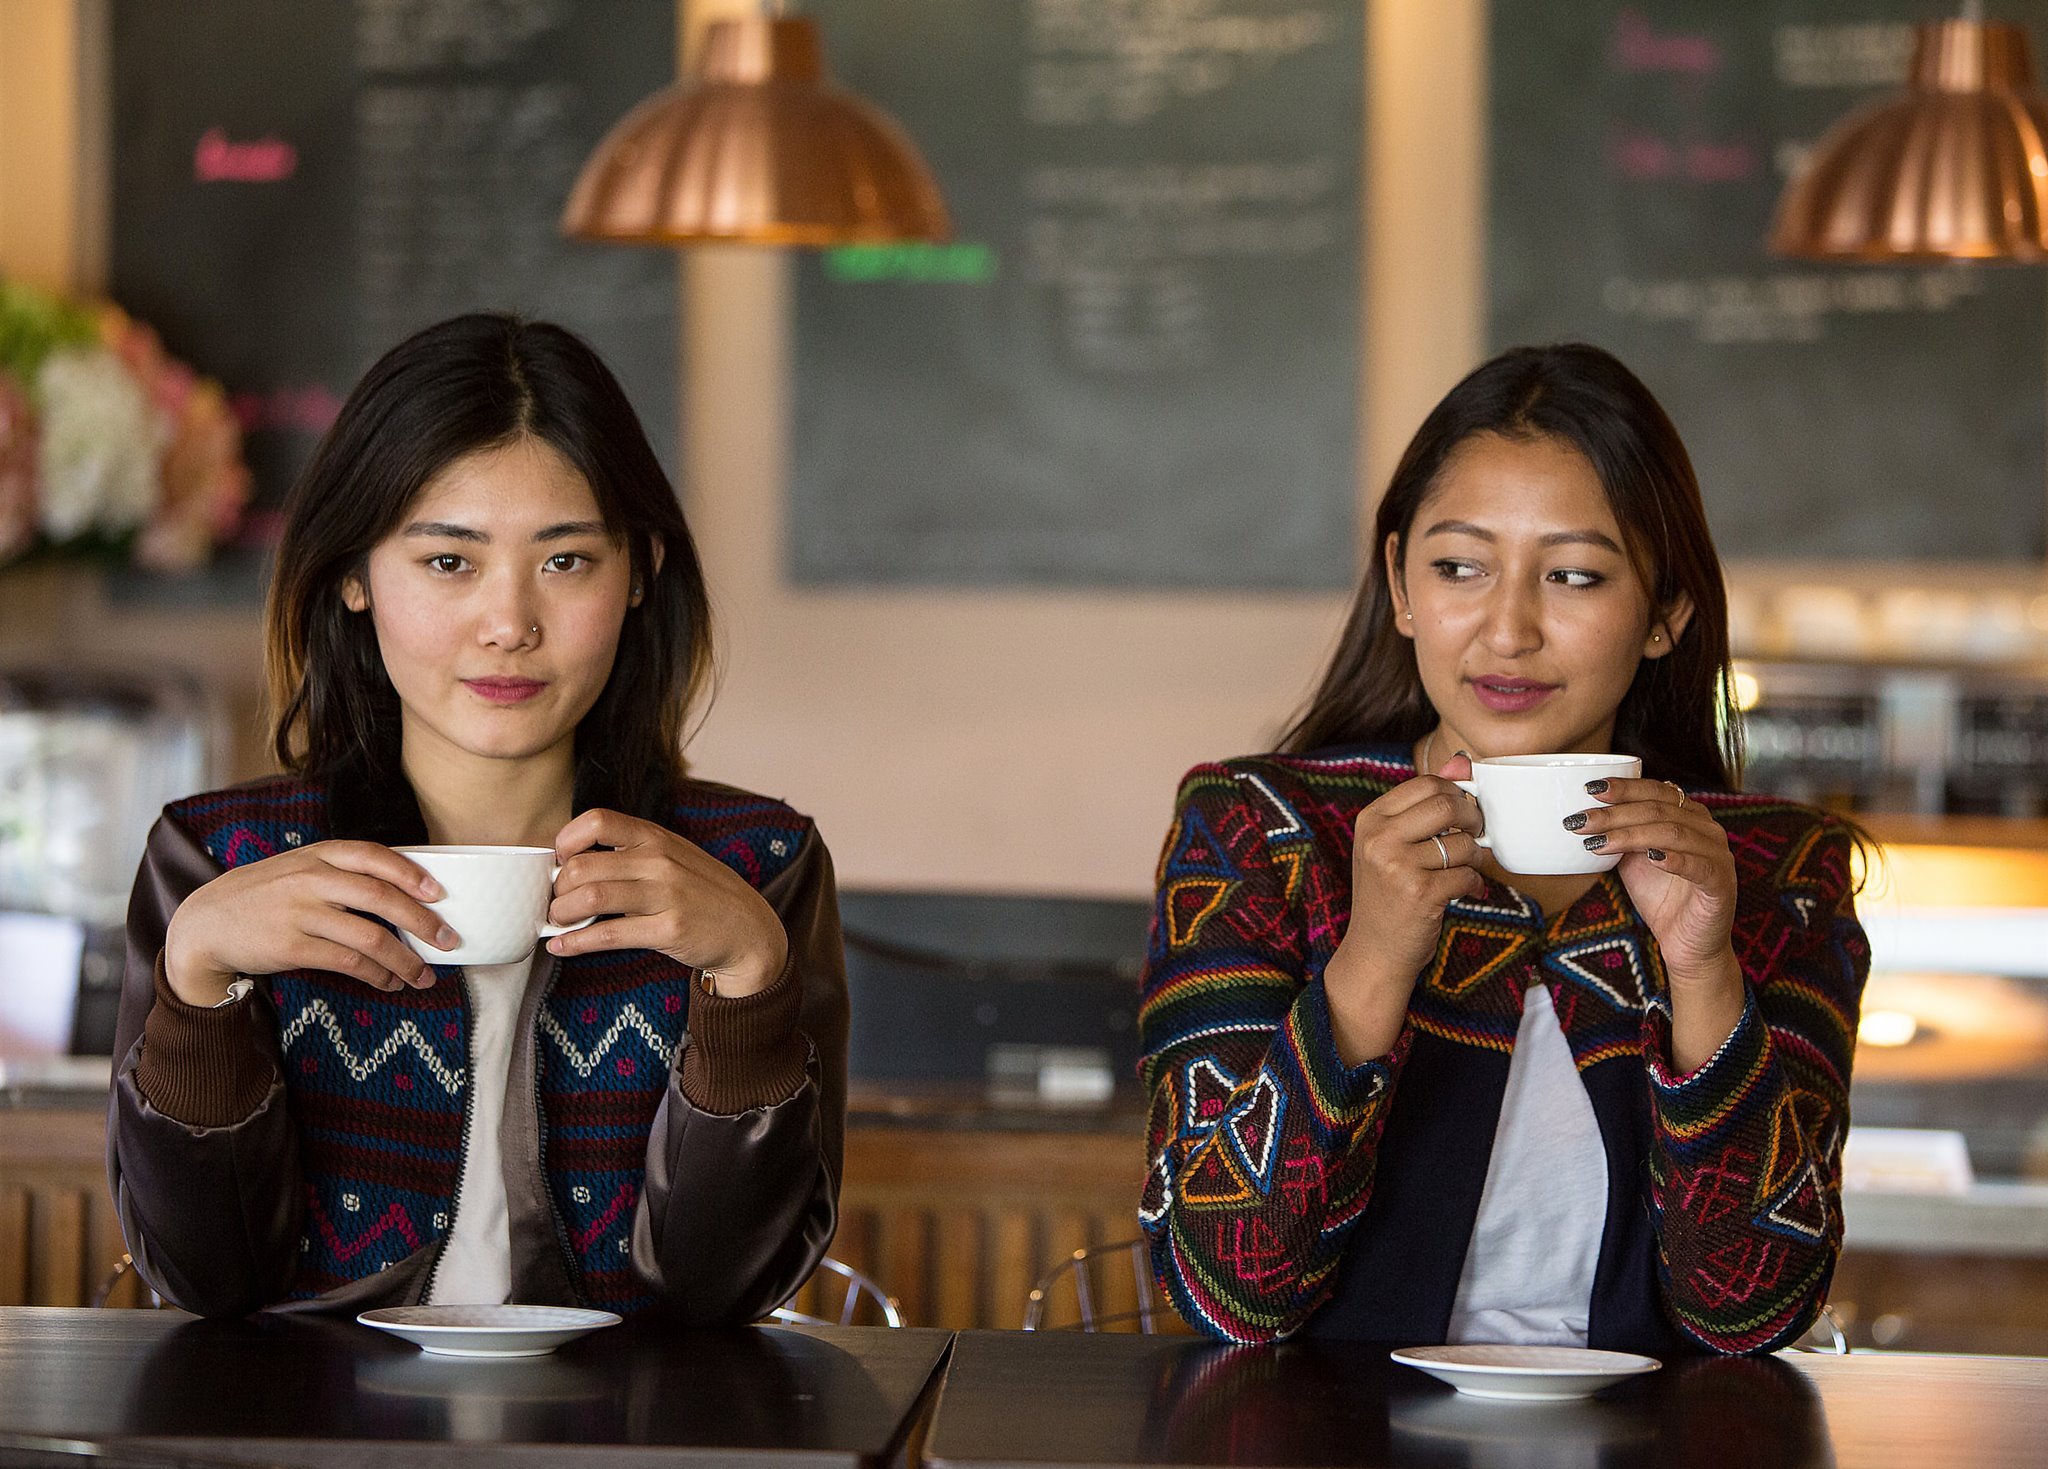 Two young Bhutanese woman sat next each other in a cafe, drinking a hot drink